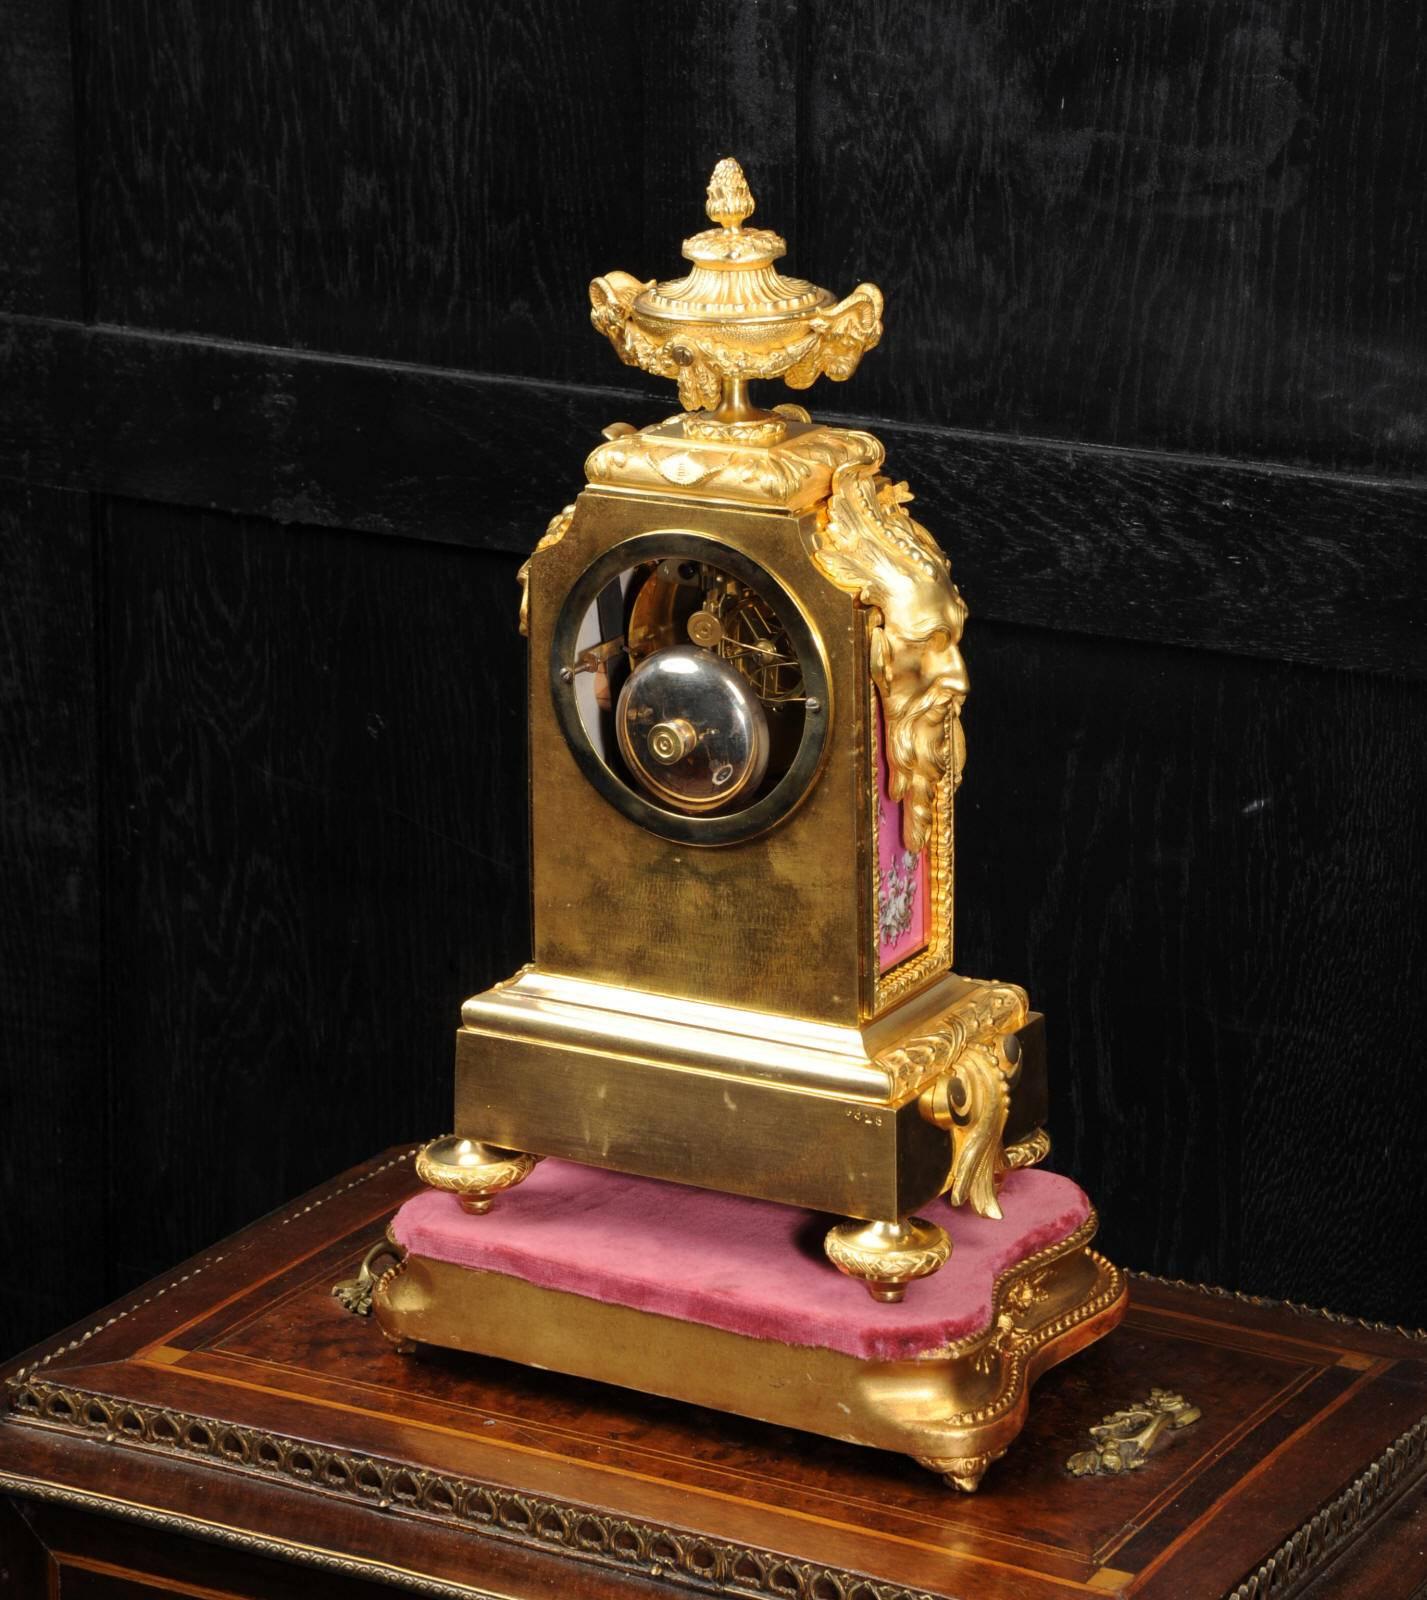 19th Century Early Ormolu and Sèvres Porcelain Clock by Raingo Frères, Fully Working